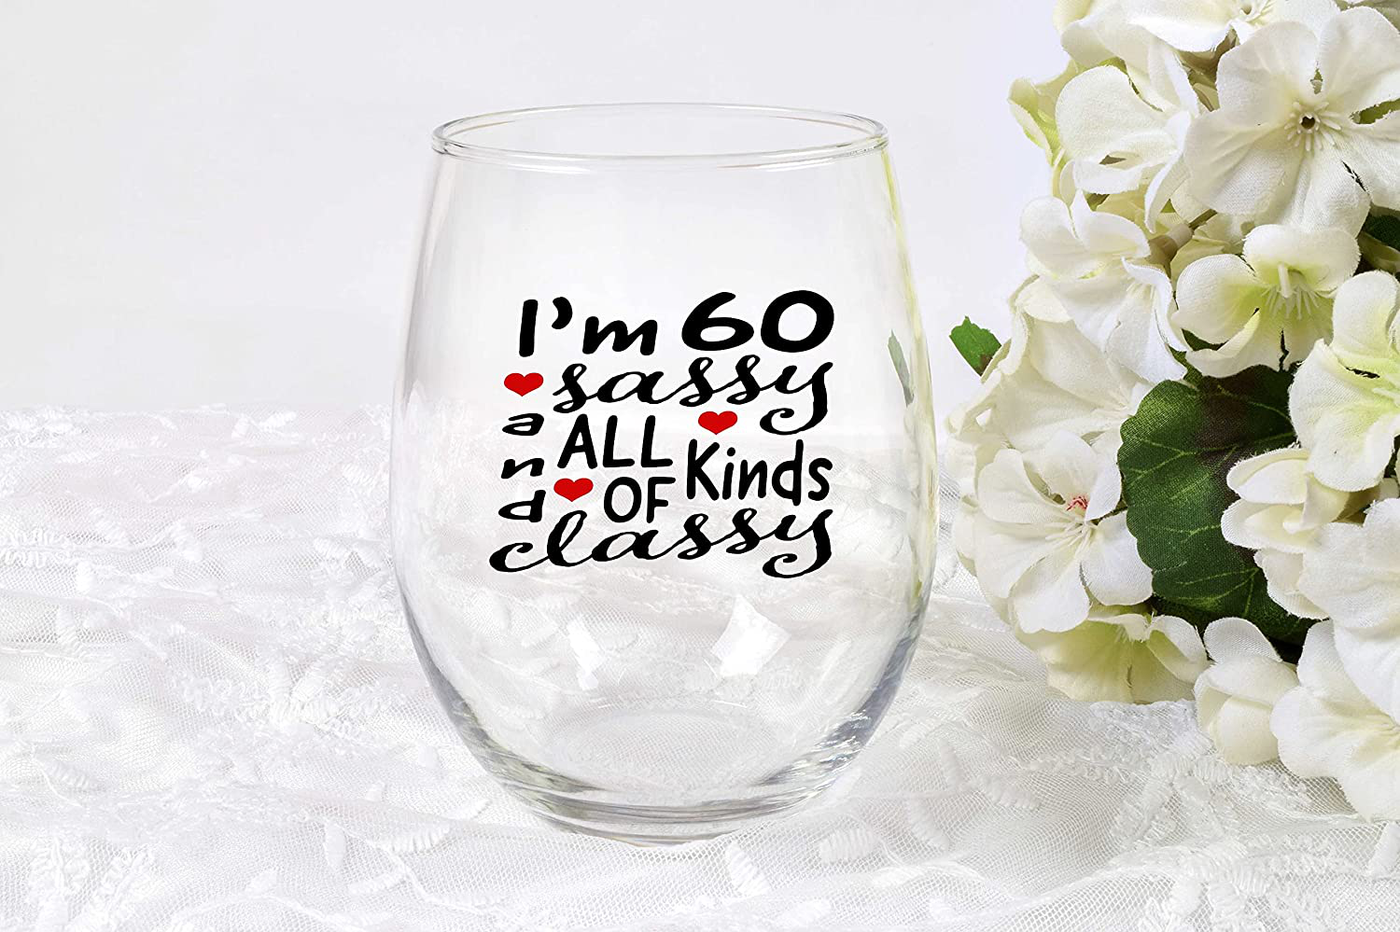 60 and Sassy, Funny 60th Birthday Gifts For Women Ideas, 60th Birthday Wine Glass, Party Favors 60th Birthday Photo Booth Props, Moms 60th Birthday Gifts For Her, Party Decorations 60th Birthday Decor